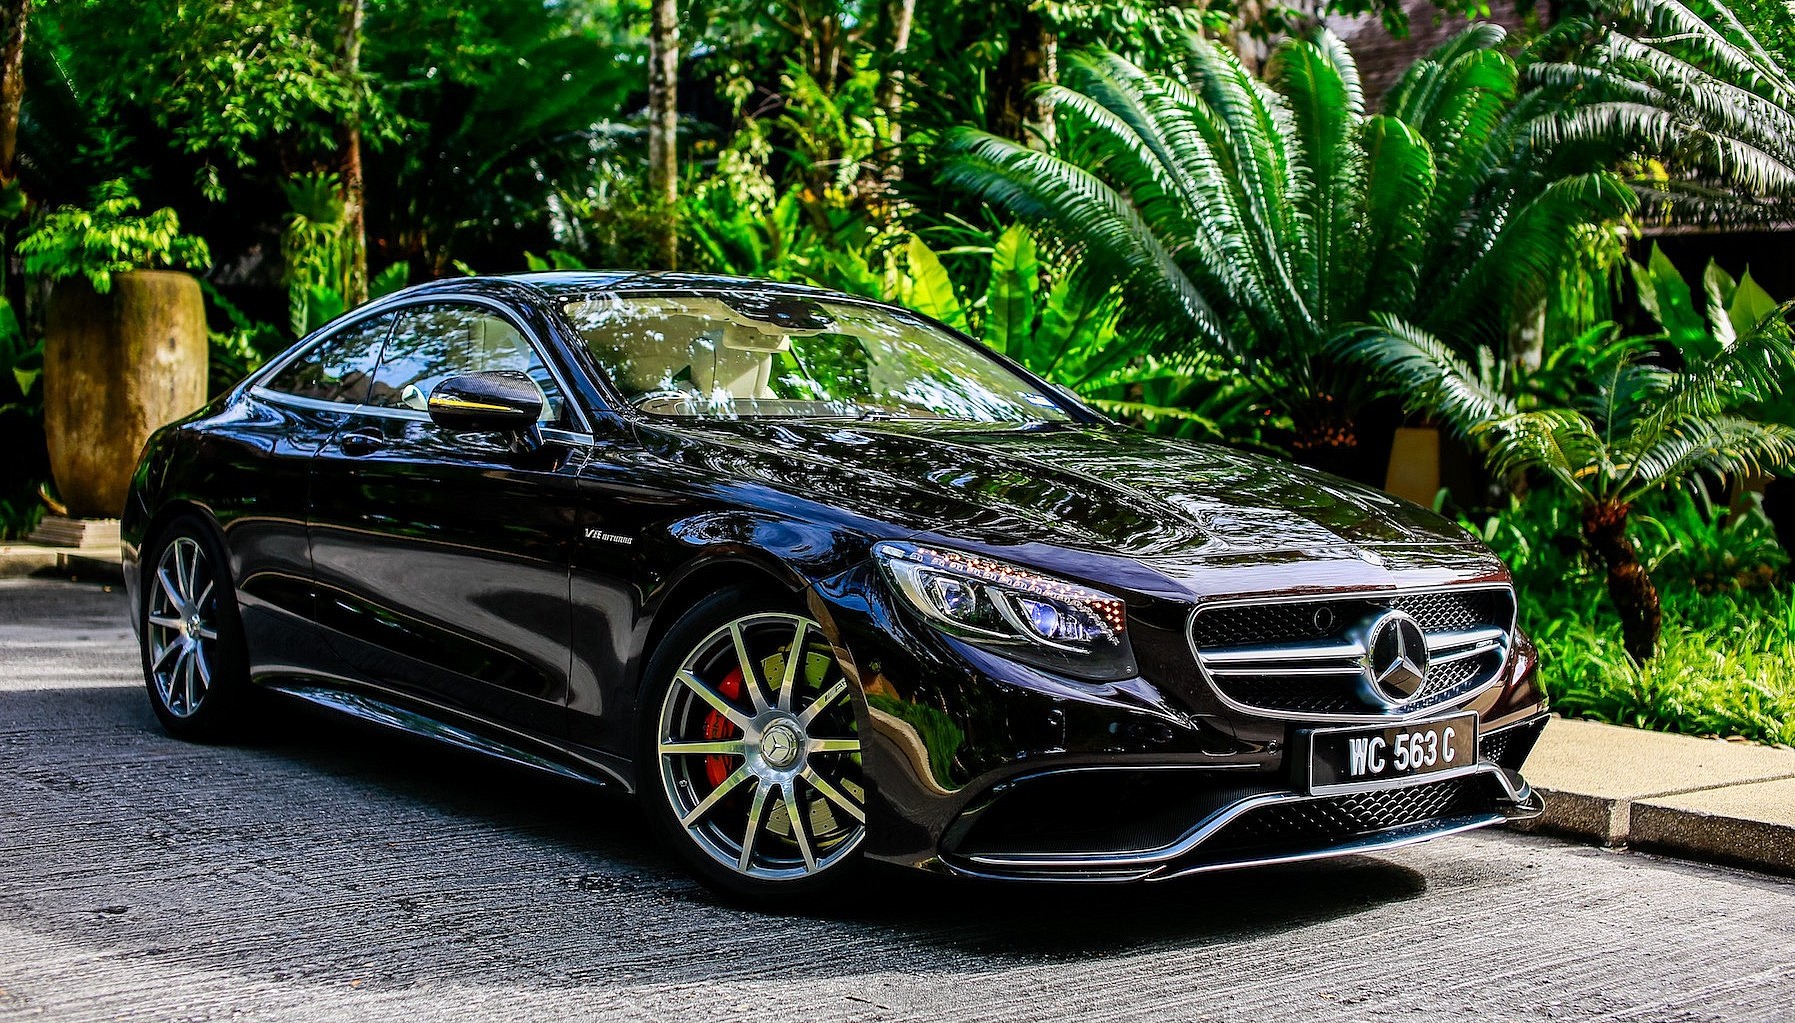 The Mercedes-AMG S 63 Coupe leads the 2017 Mercedes Dream ...